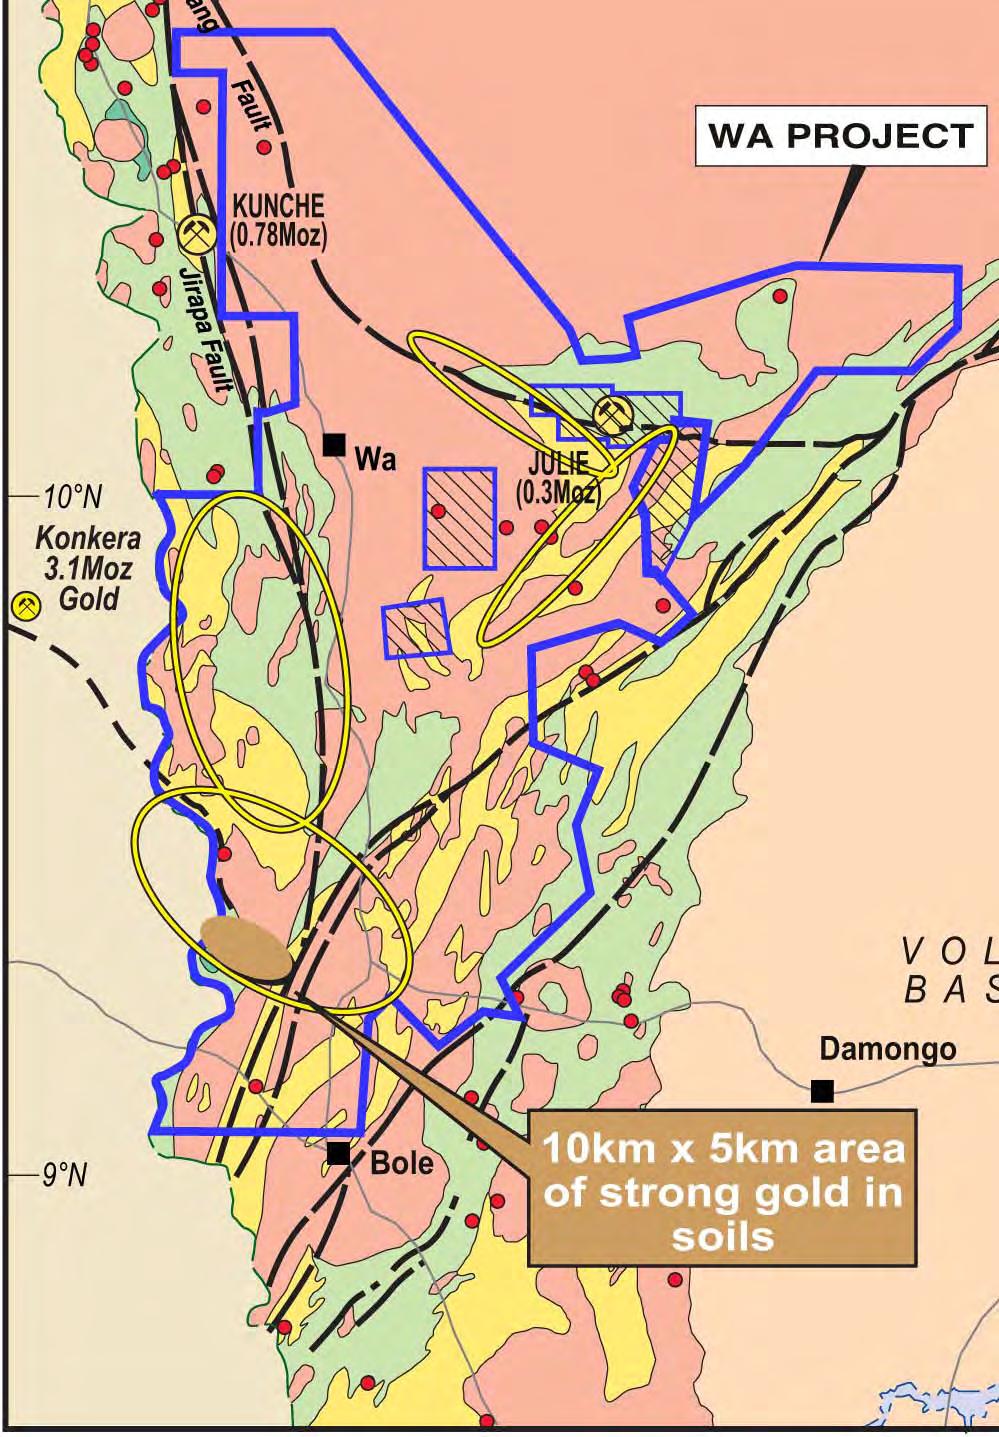 Wa South Intersection of Wa-Lawra and Bolgatanga greenstone belts Extension of Batie West structure No pre Castle drilling Soil anomaly confirmed and